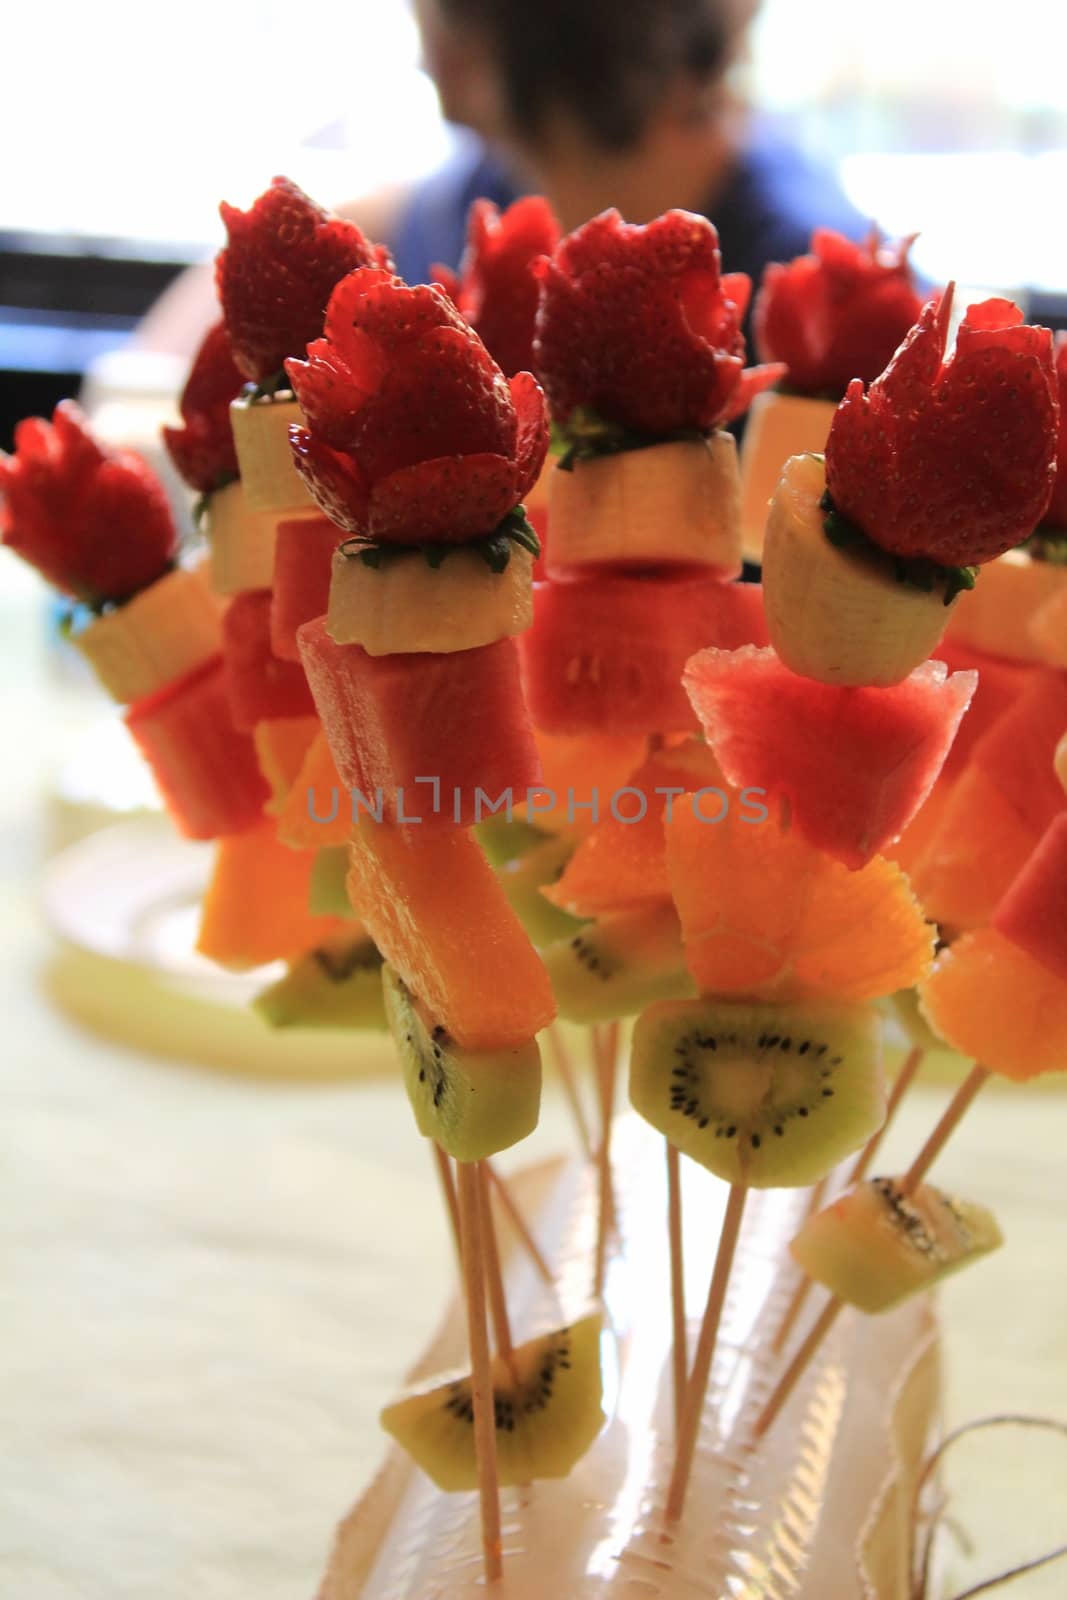 Colorful and tasty fruit skewers